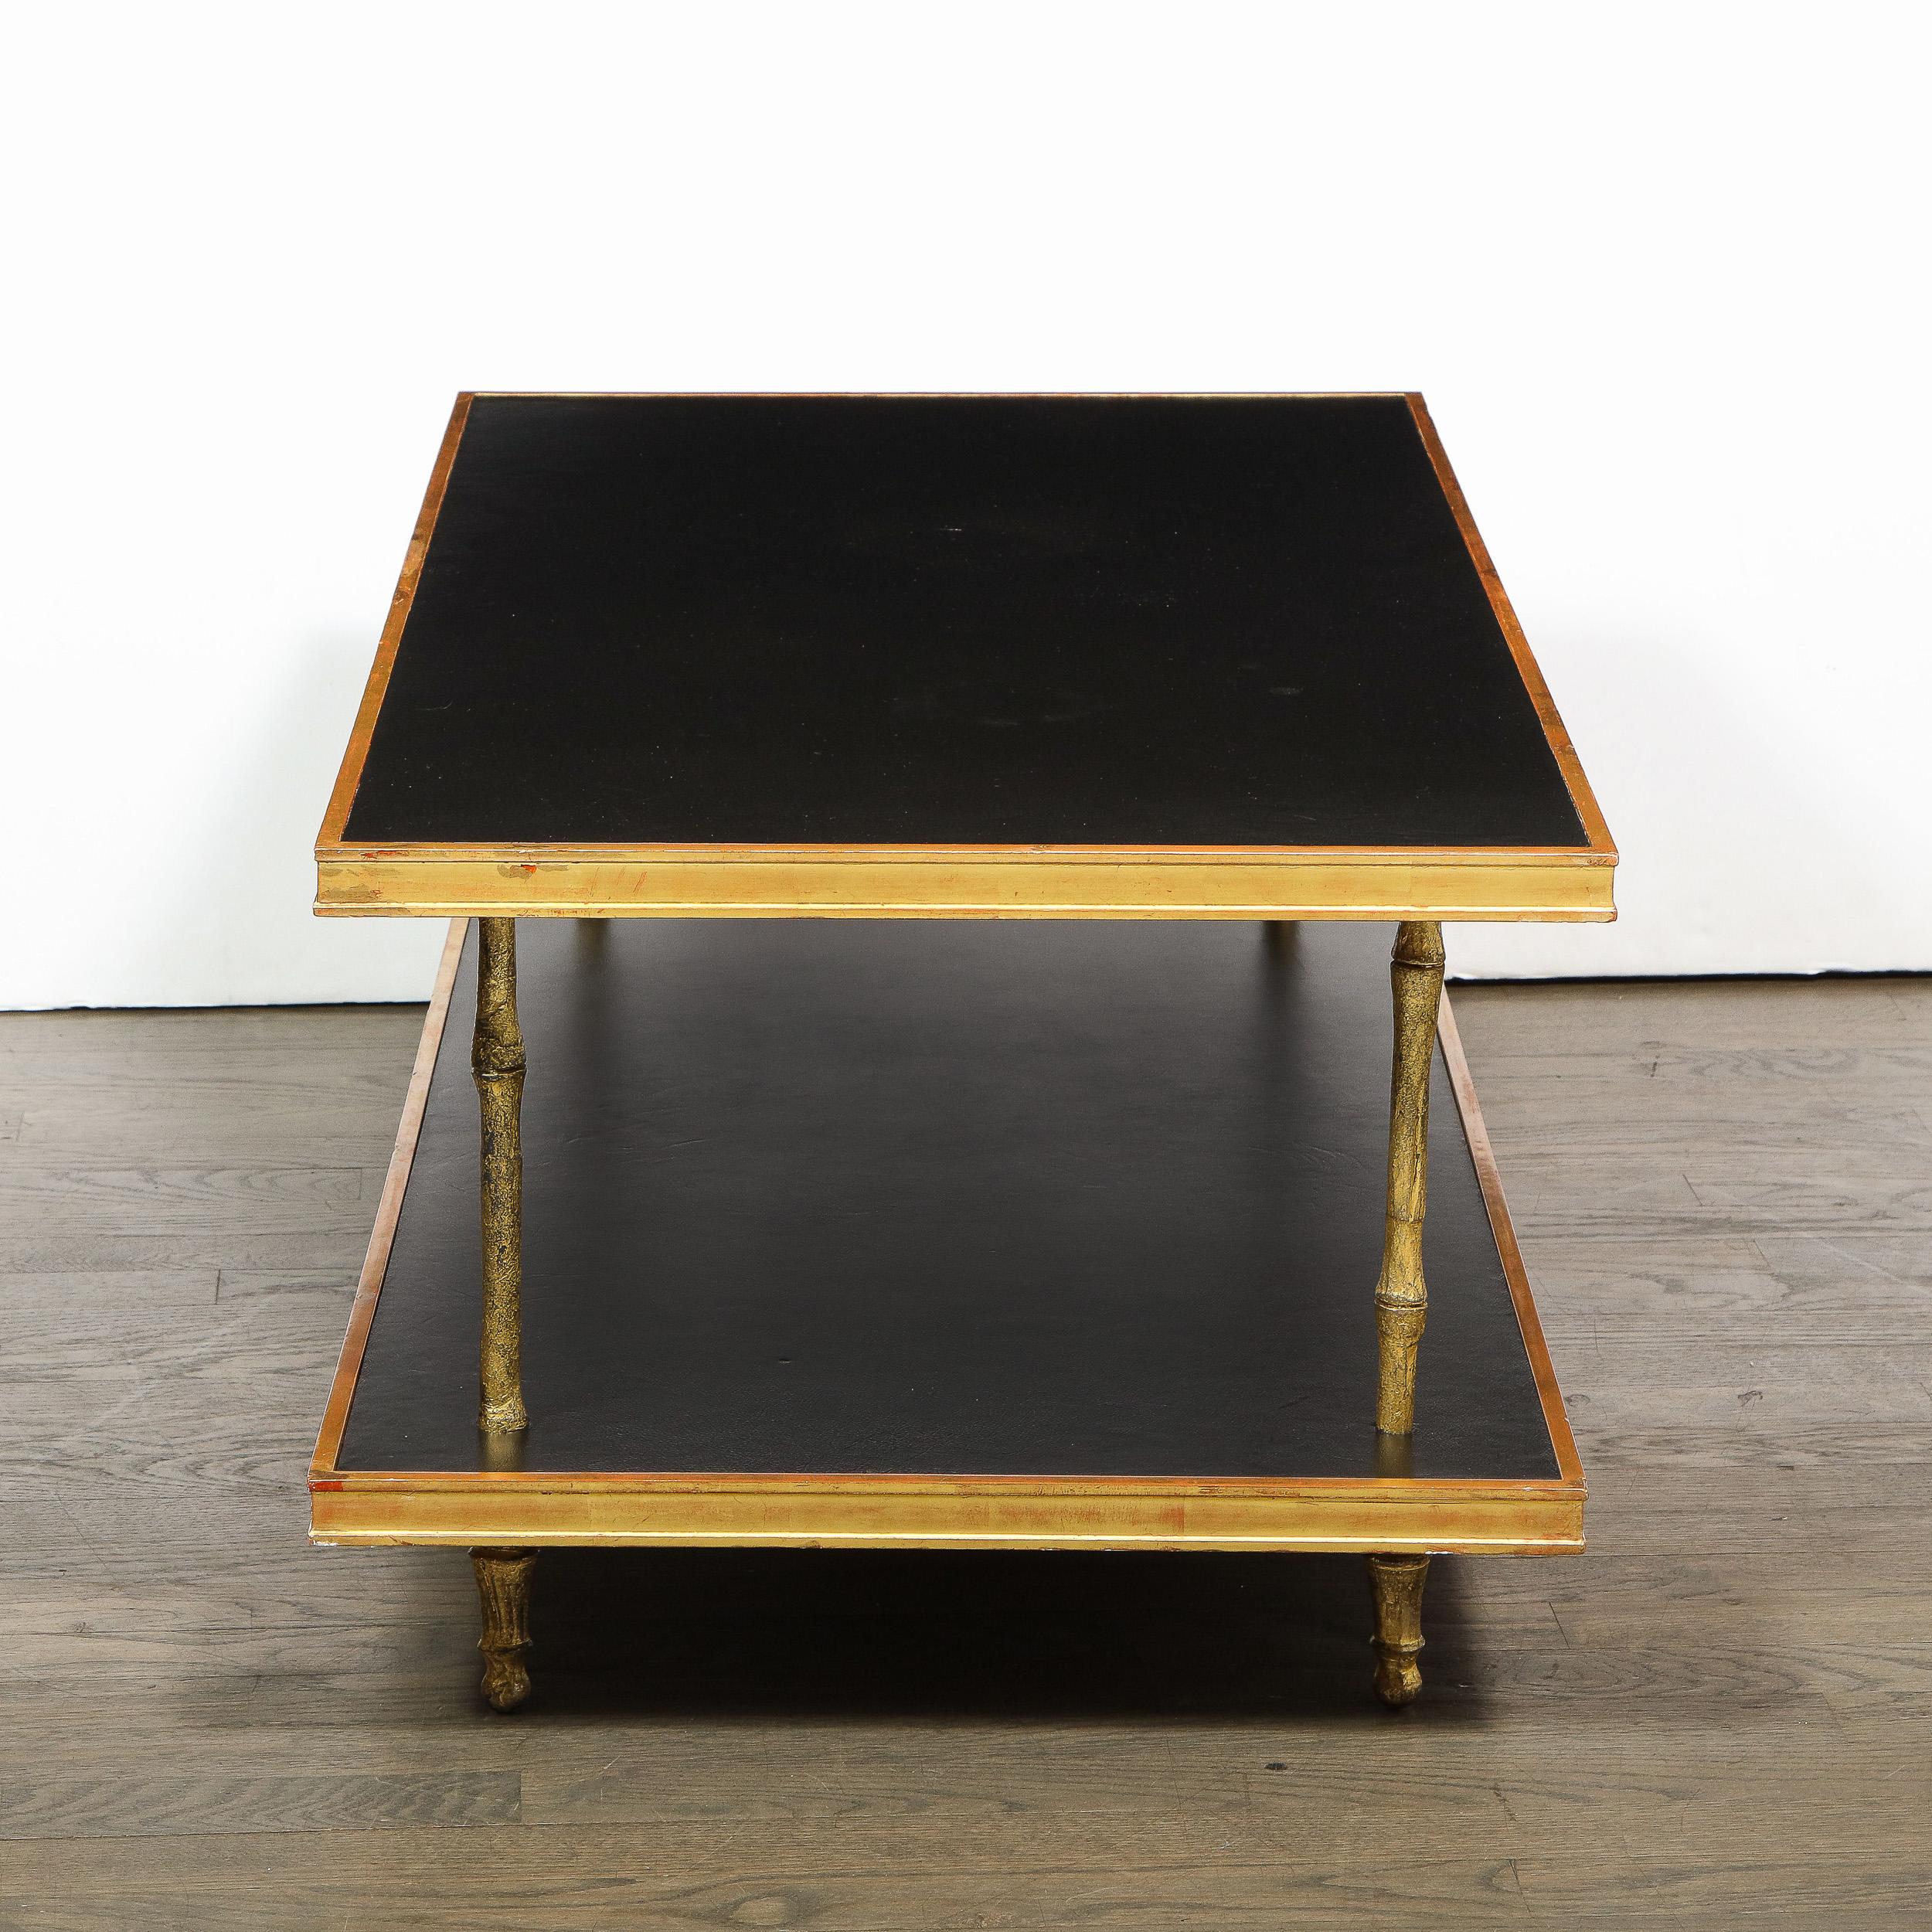 20th Century Modernist Black Leather and Giltwood Two-Tier Cocktail Table by Carole Gratale